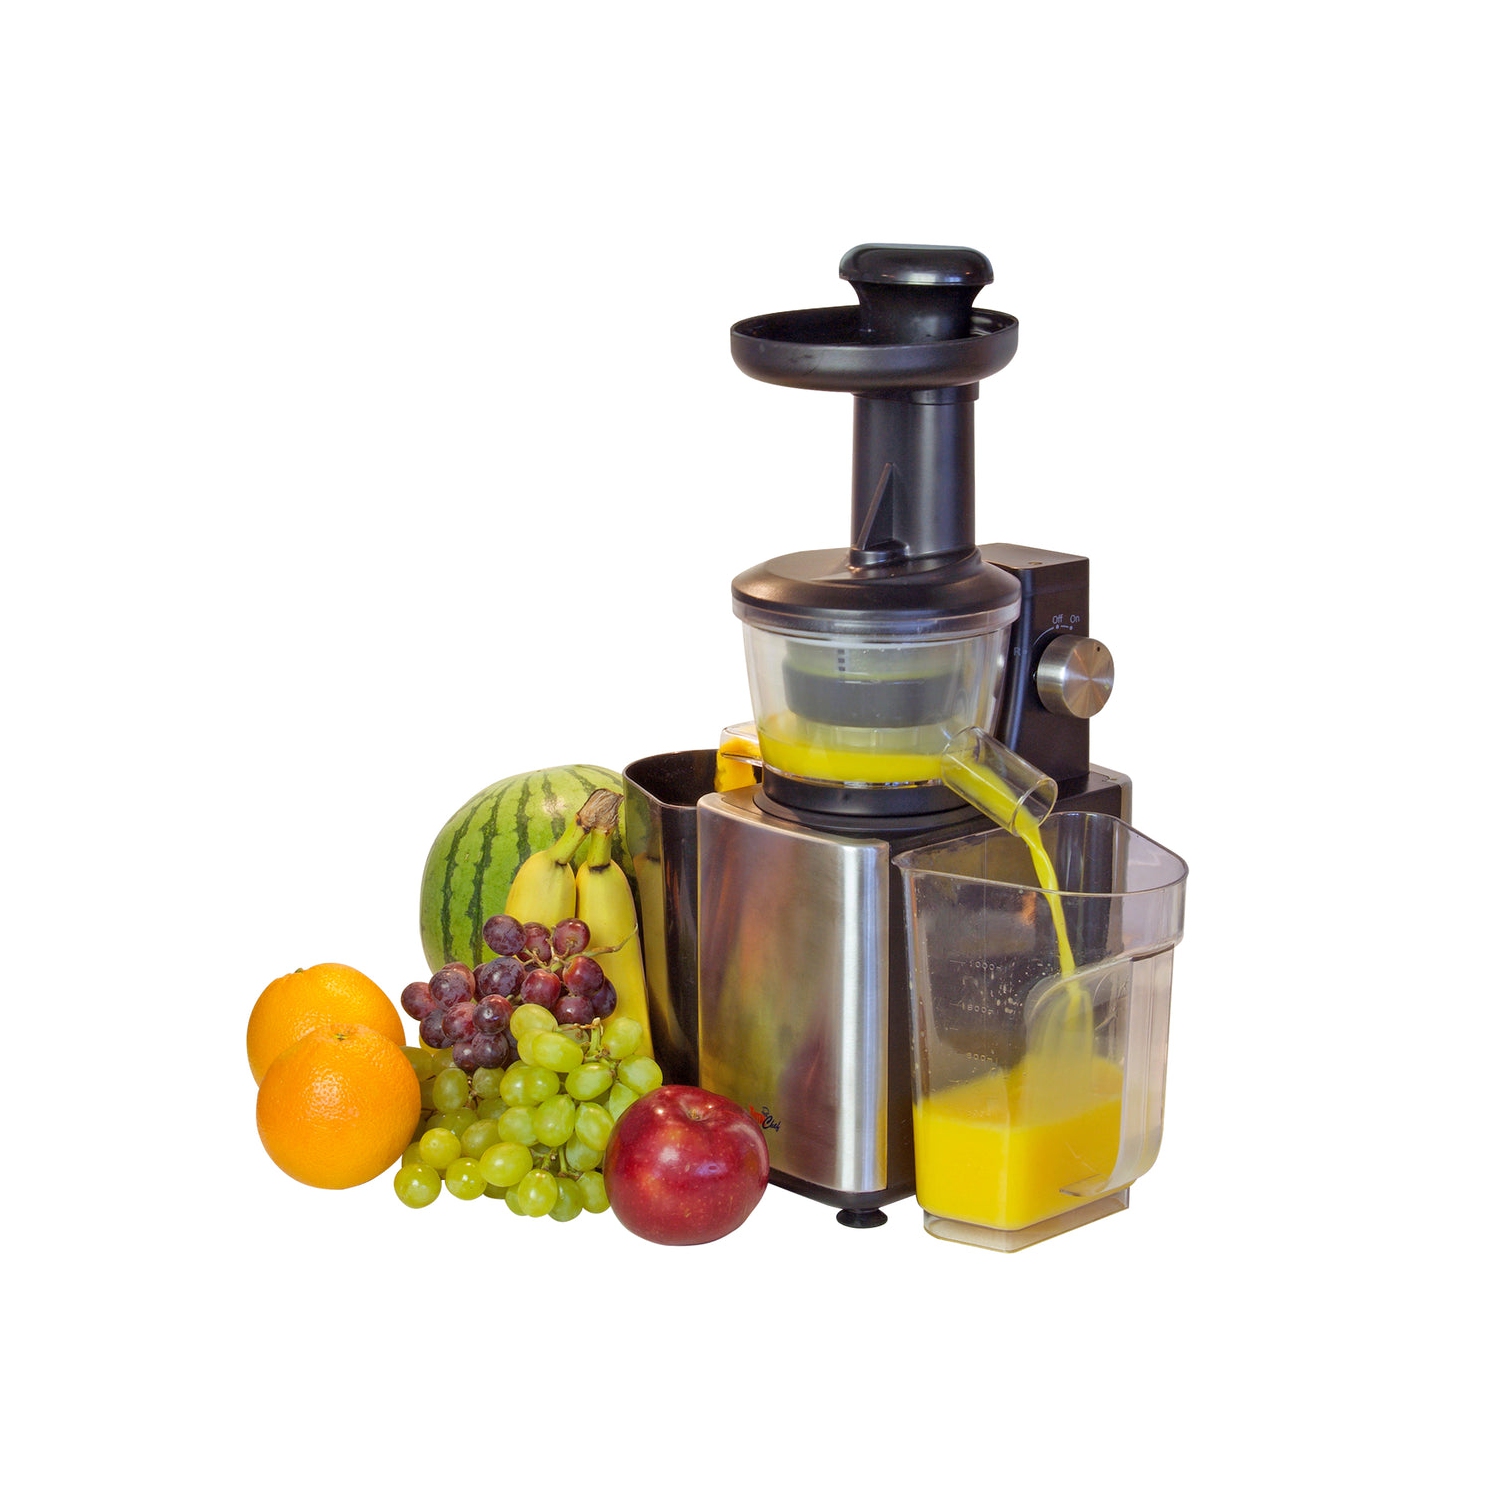 Total Chef Slow Juicer, Cold Press Juicing Machine for High Quality Nutrient-Dense Juice, Powerful Masticating Juice Extractor for Leafy Greens, Herbs, Wheatgrass, Fruits